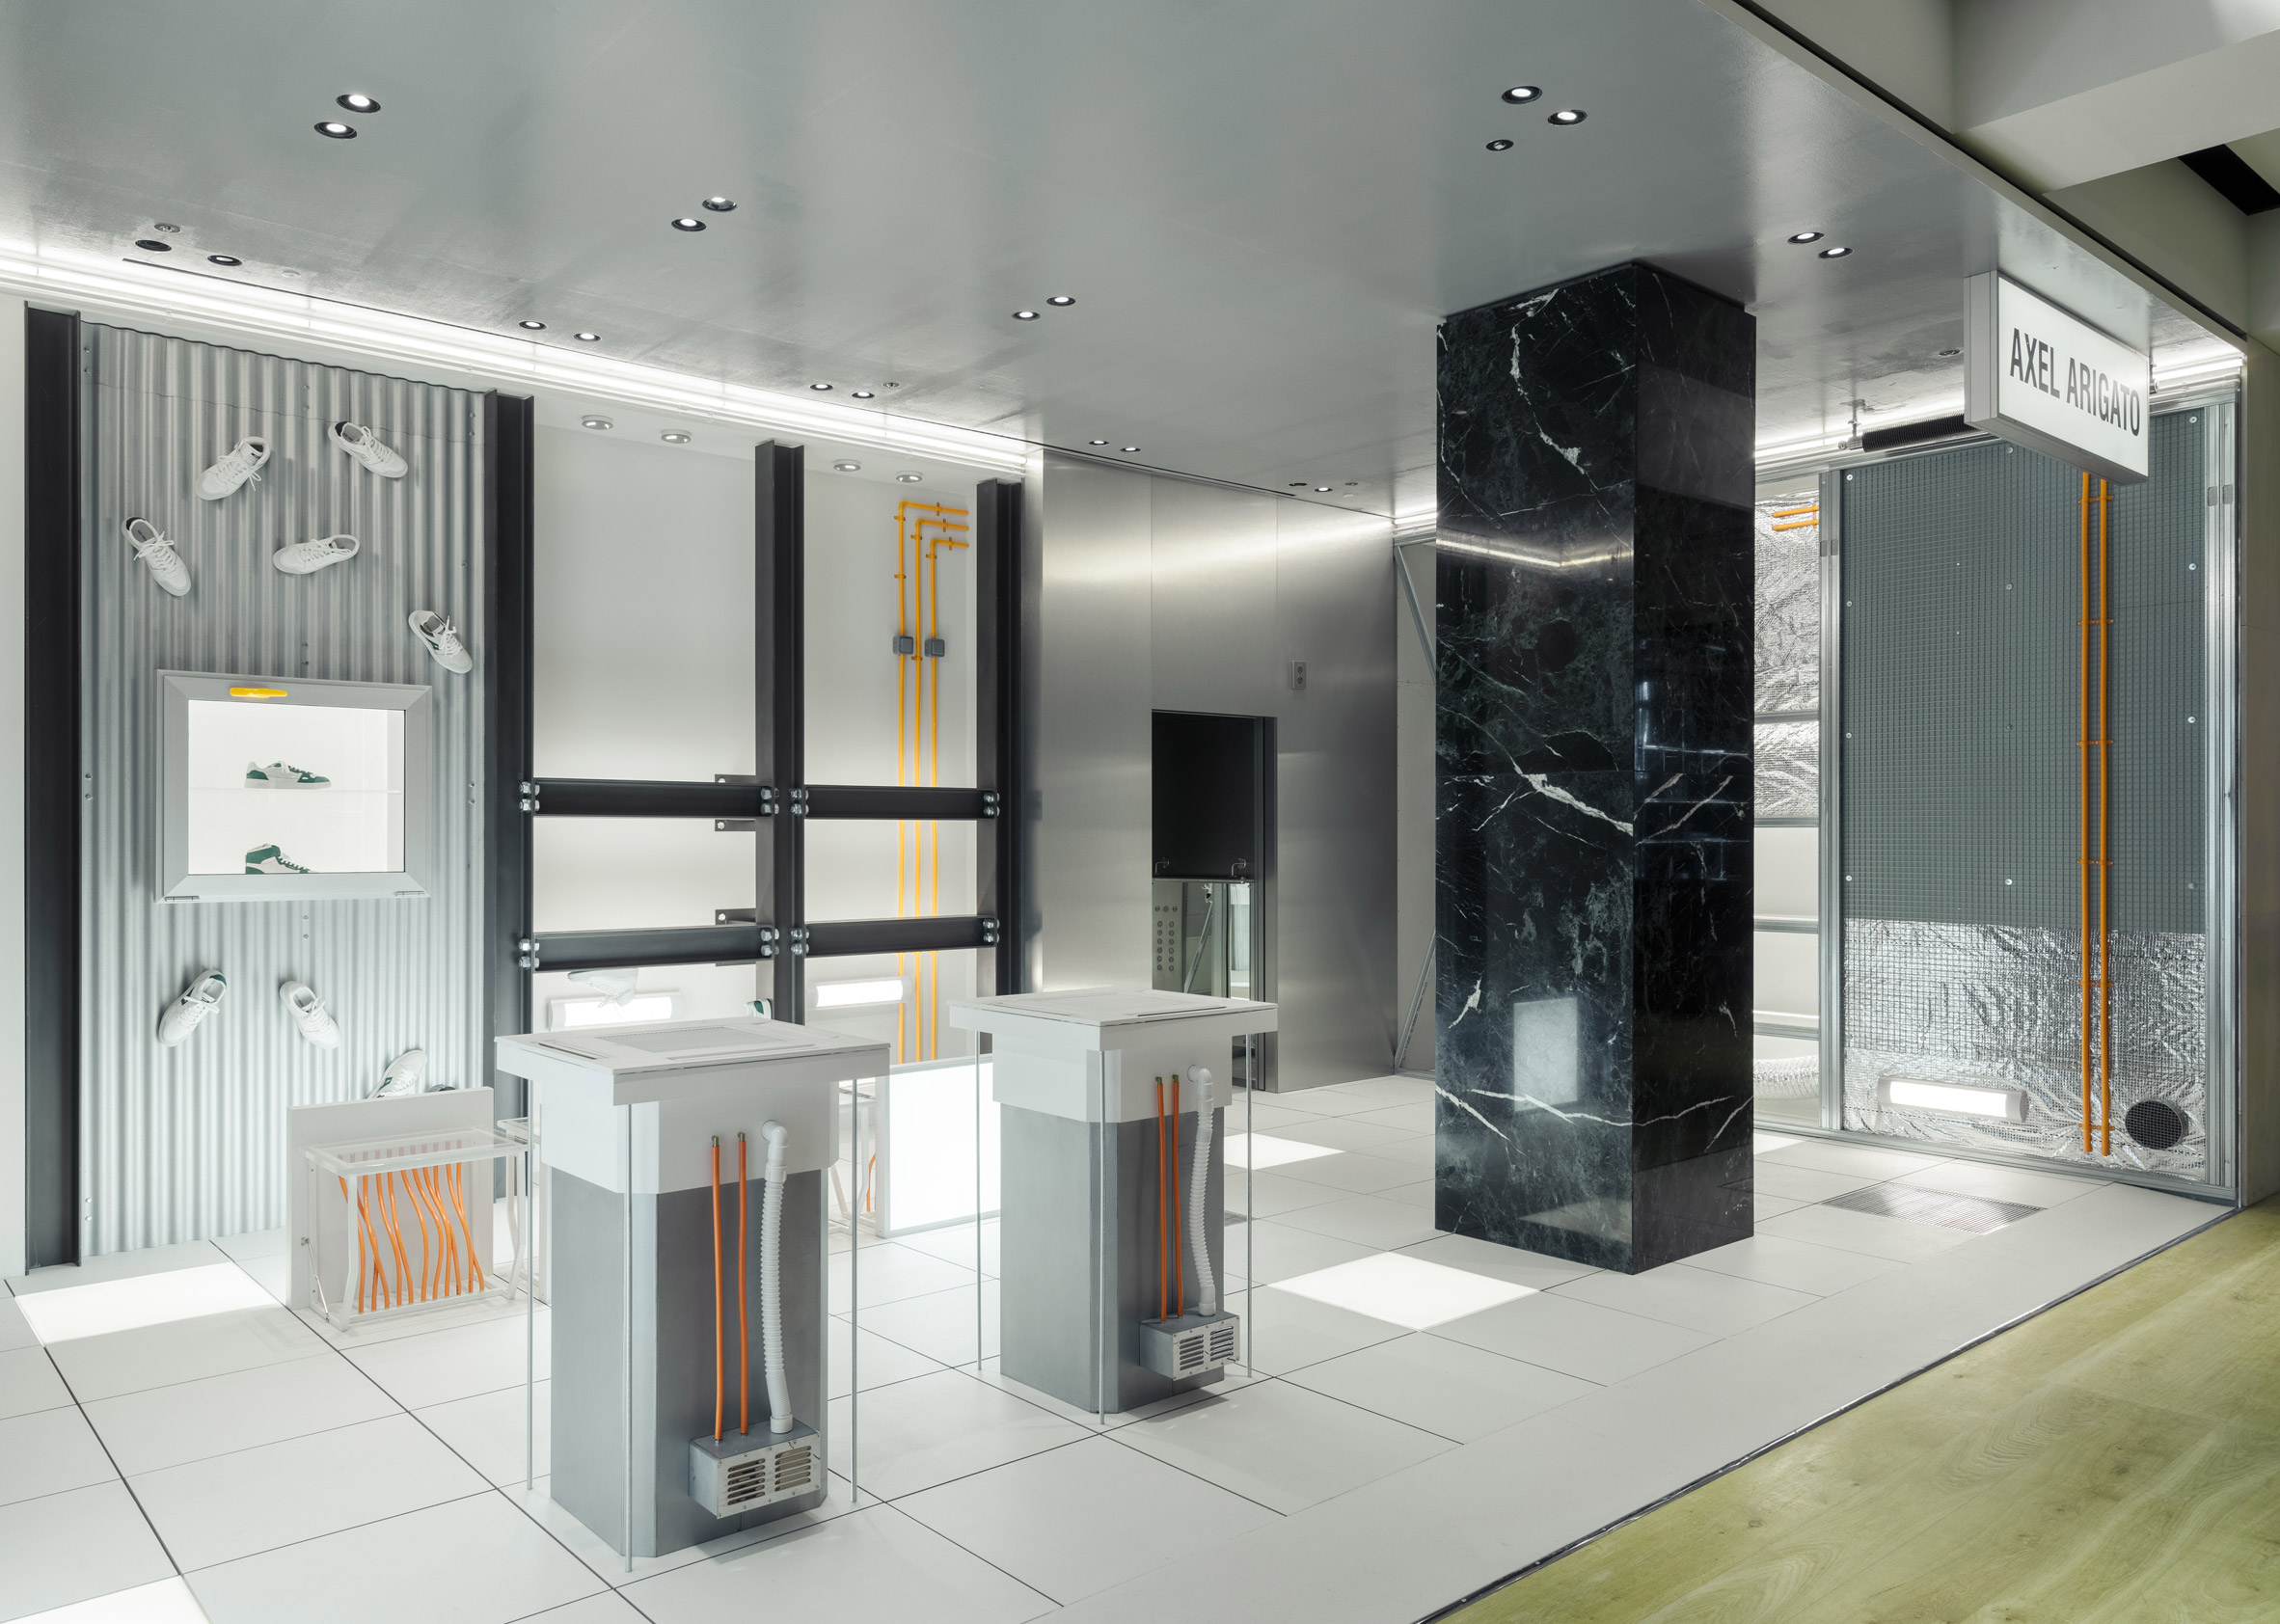 Interior image of the office-themed Axel Arigato shop at Selfridges